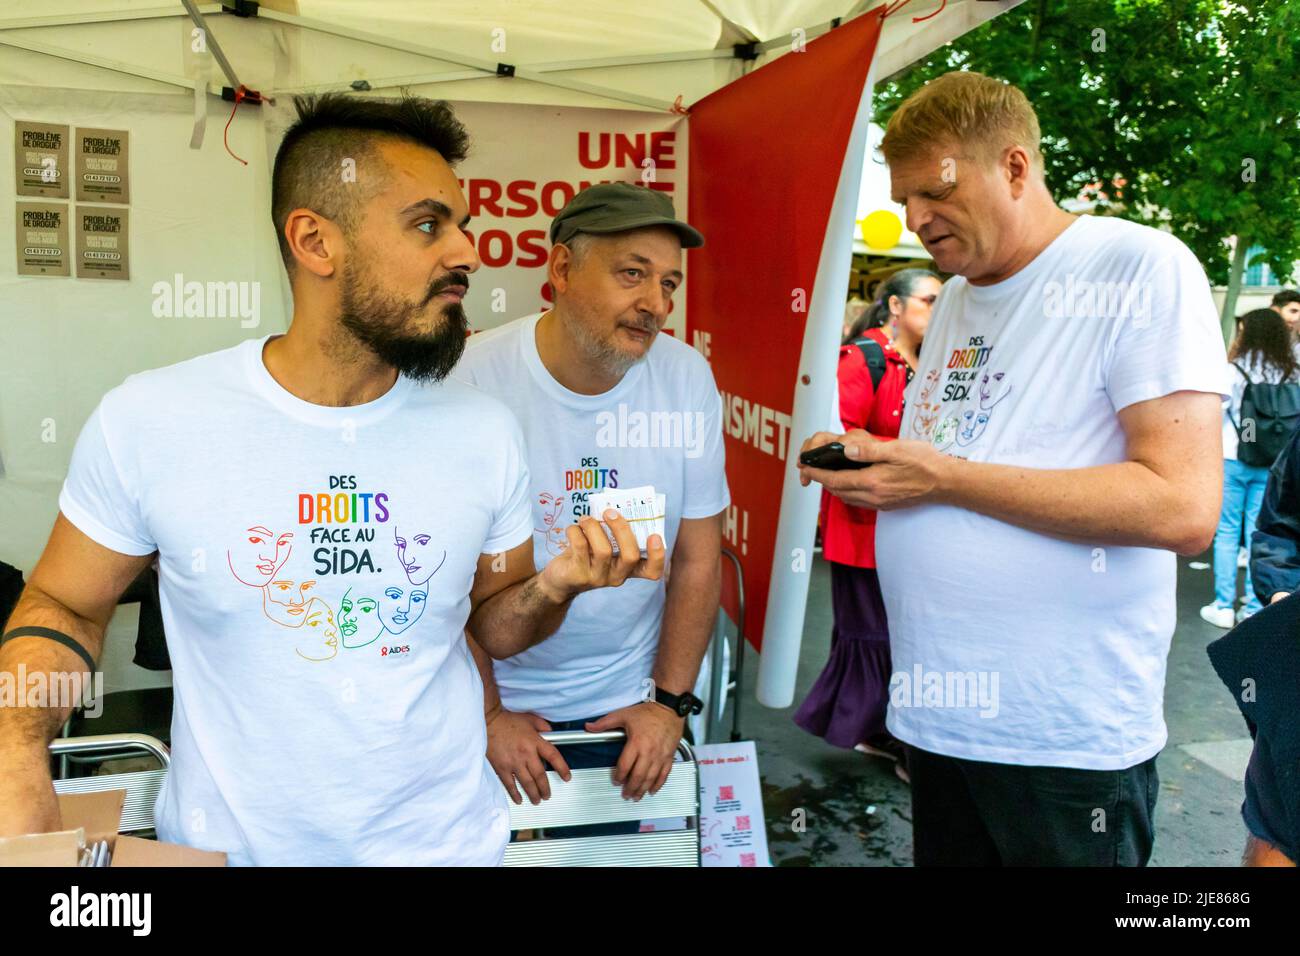 Paris, France, AIDS Activists, from AIDES N.G.O., Distributing Condoms and information at Stand in Gay Pride/ LGBTQI March, volunteers helping community, senior social life Stock Photo